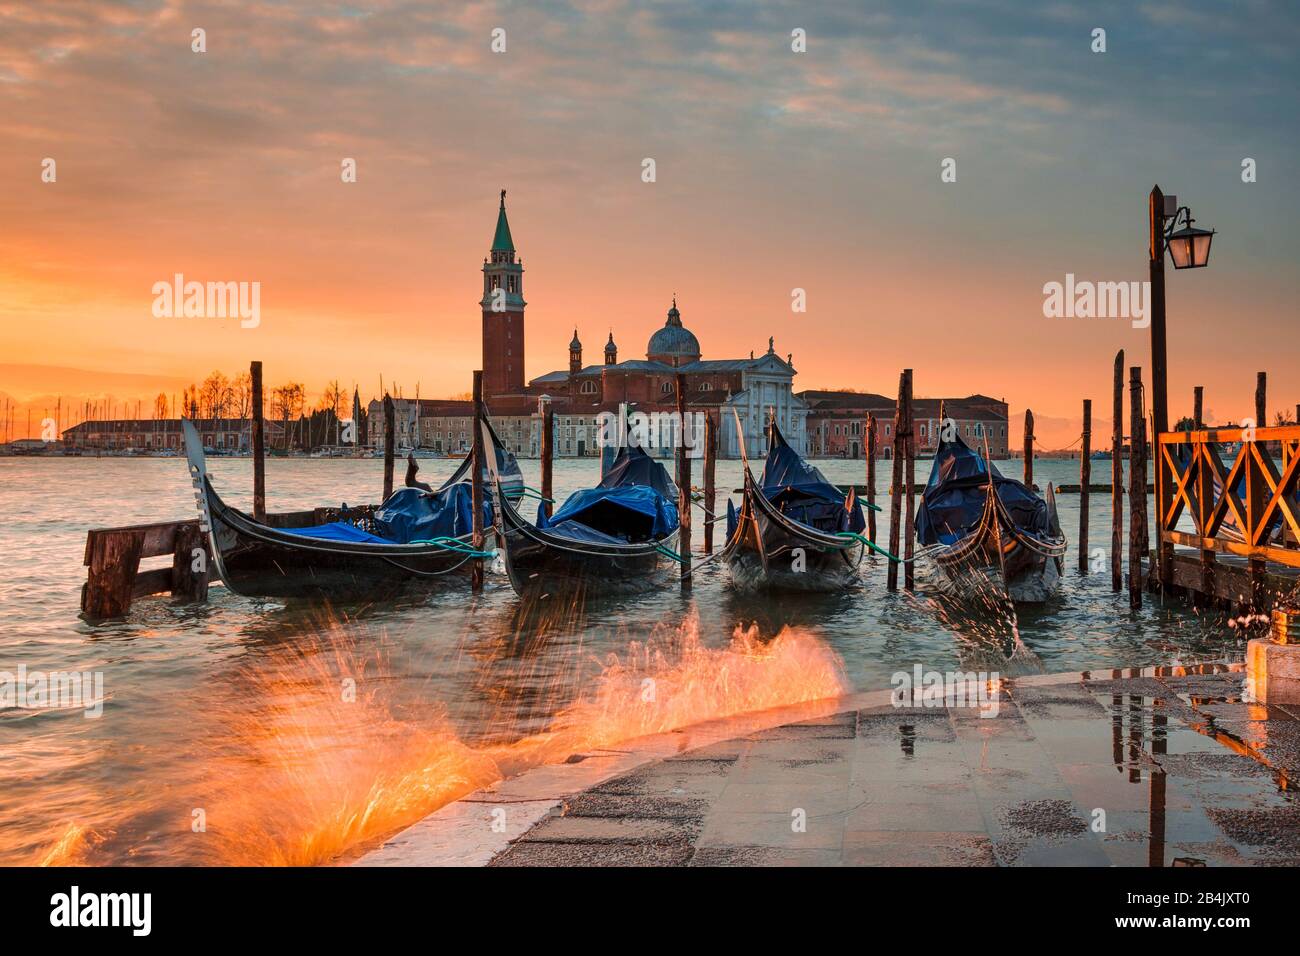 Gondolas on the Grand Canal at sunrise in Venice, Italy Stock Photo